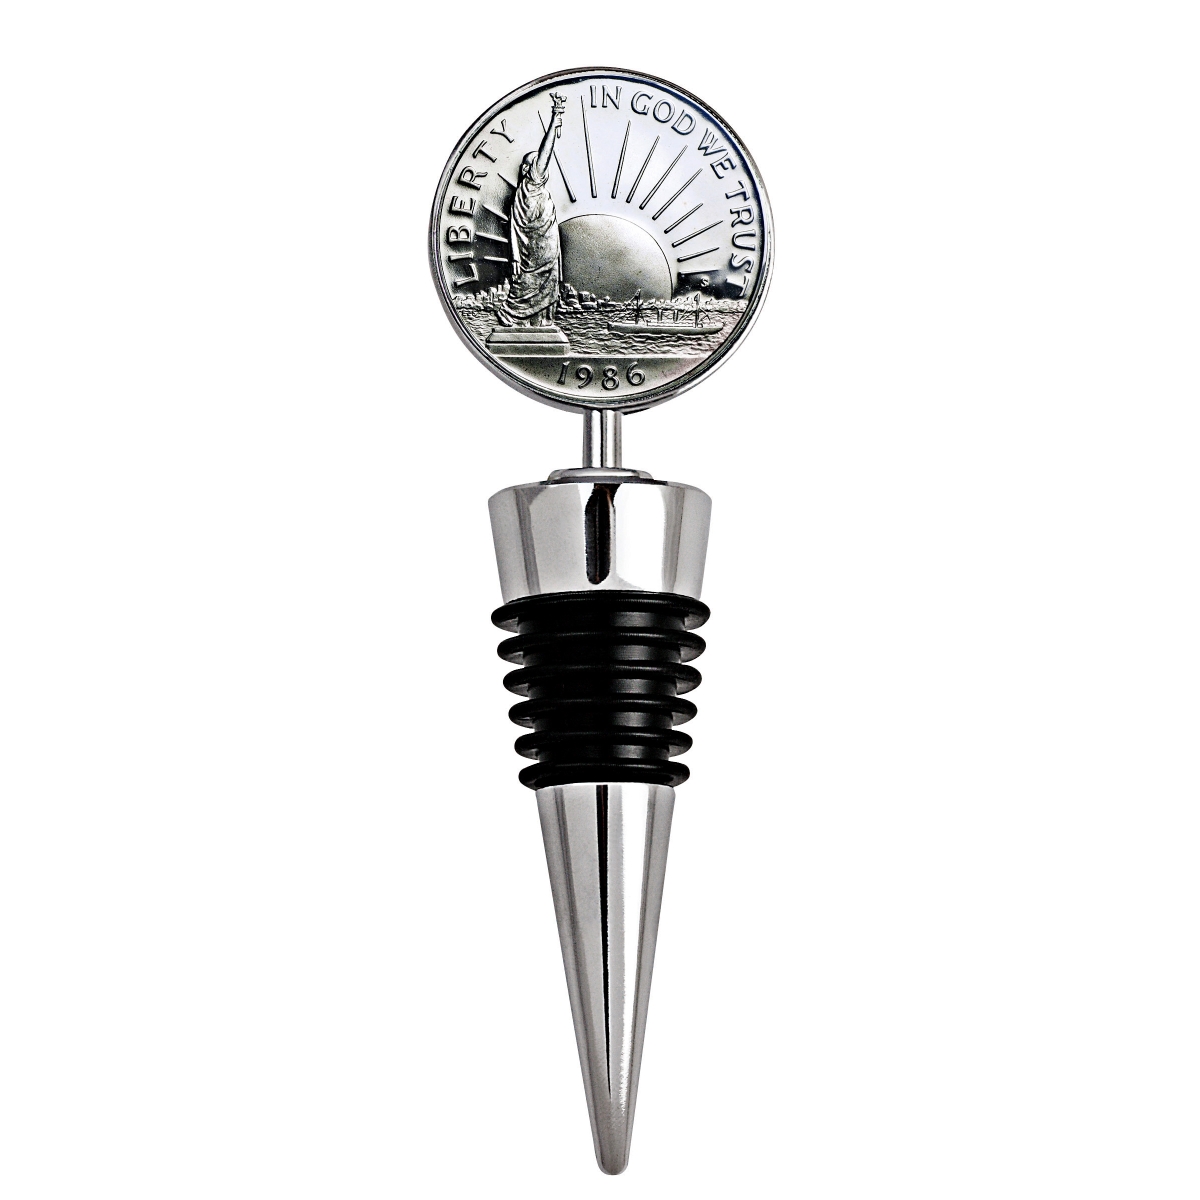 Picture of UPM Global 15207 4 x 1.3 in. Statue of Liberty Commemorative Half Dollar Coin Wine Stopper